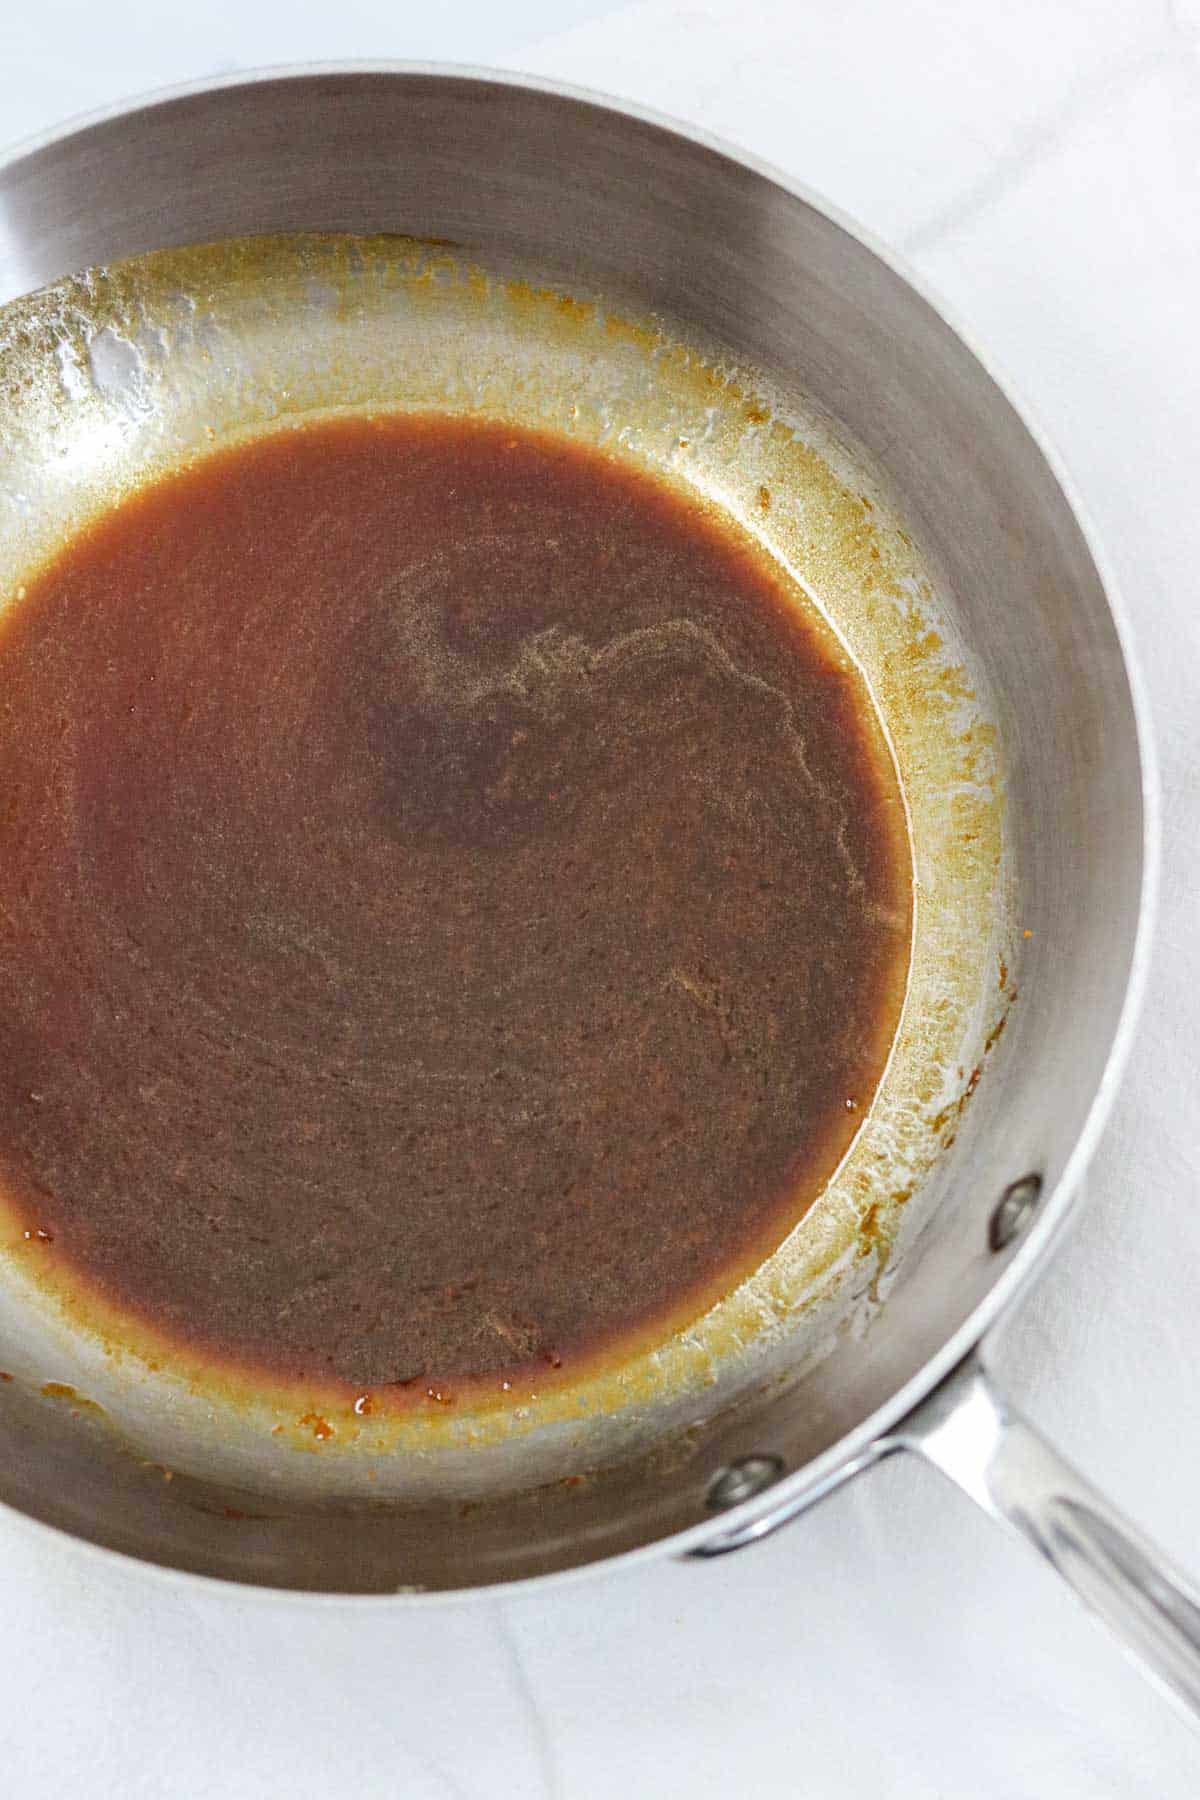 Molasses and butter mixture in a metal pan.